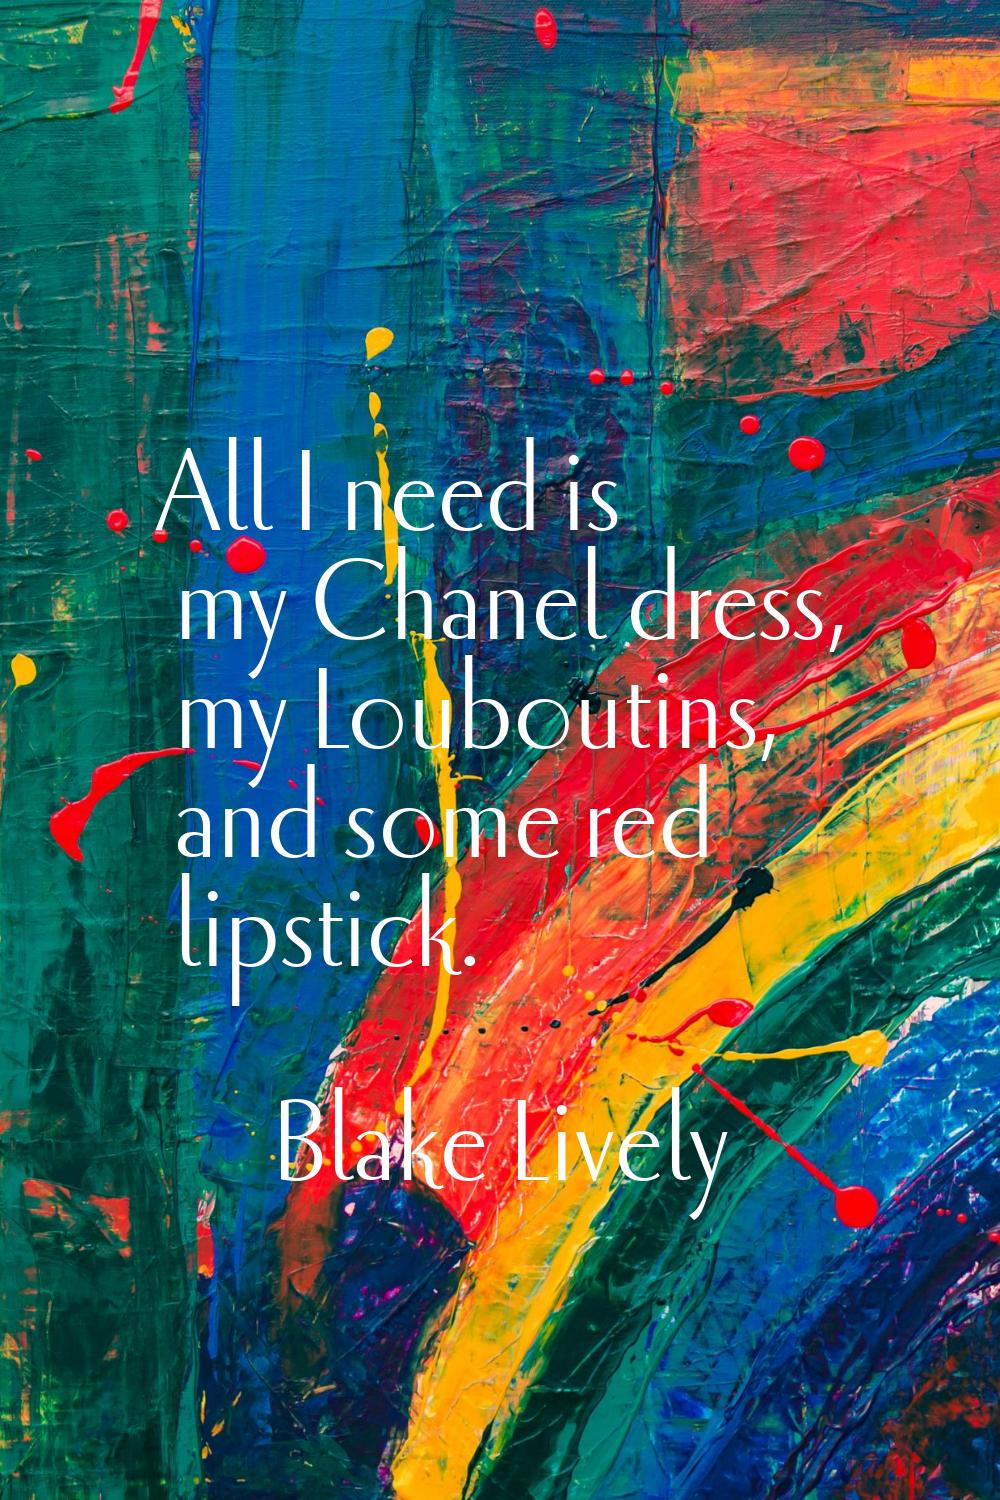 All I need is my Chanel dress, my Louboutins, and some red lipstick.